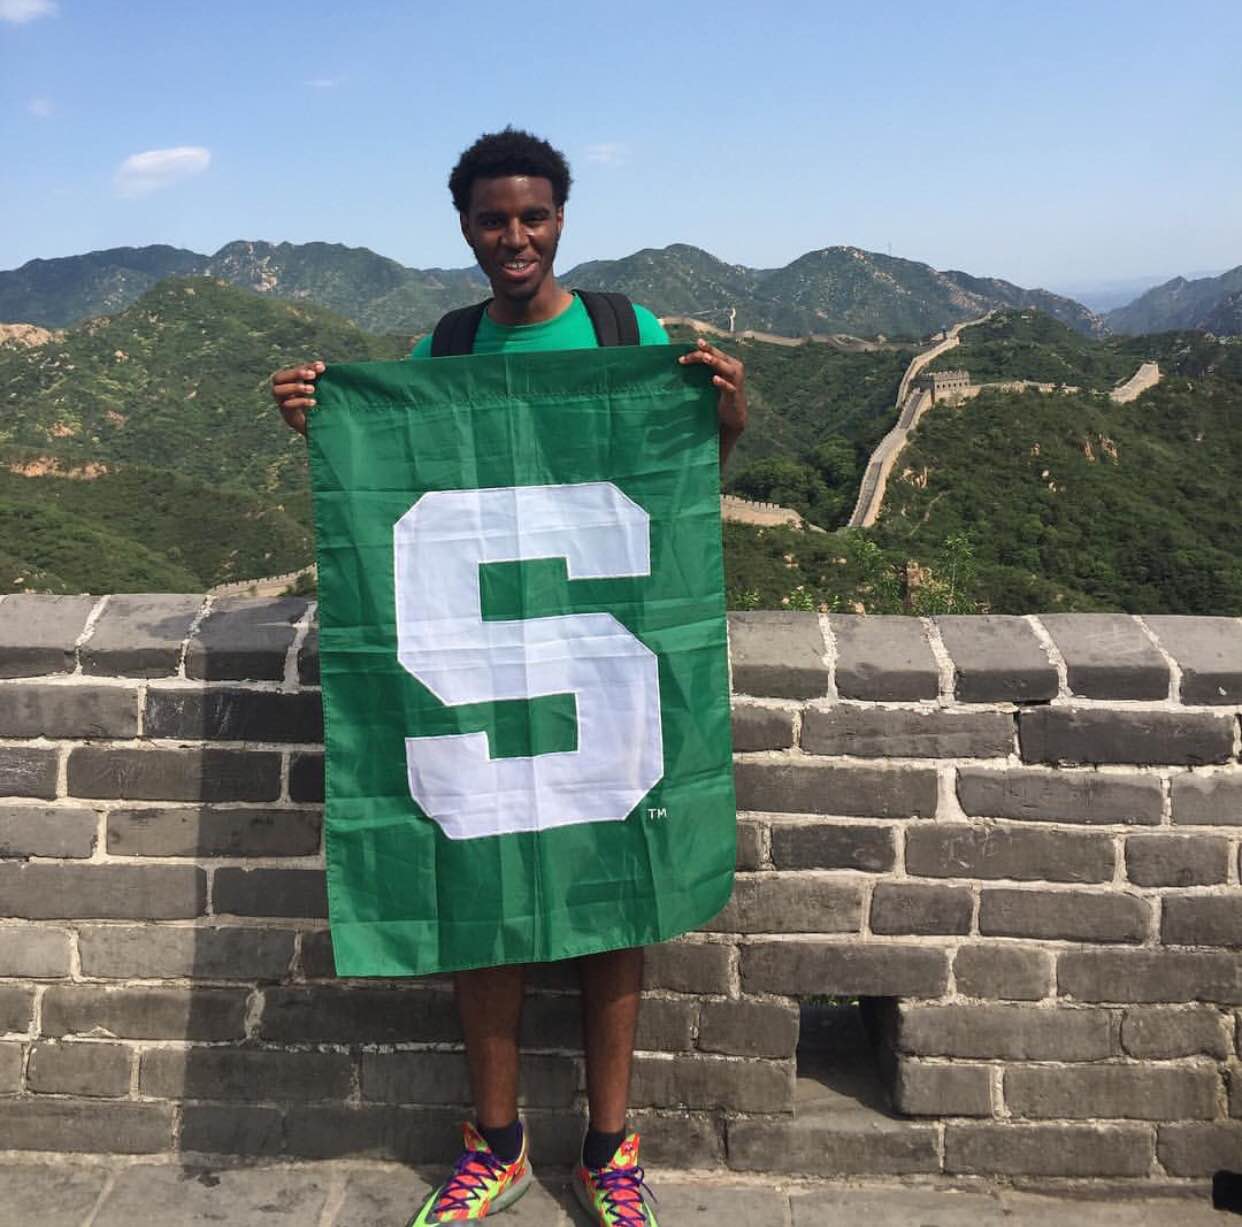  Terrel Edmondson said he likely would have dropped out of college as a freshman, but support from a Michigan State University program for low-income students helped him succeed on campus, including helping him apply and pay for a study abroad program in China. MSU is a state leader in social mobility. (Courtesy photo) 